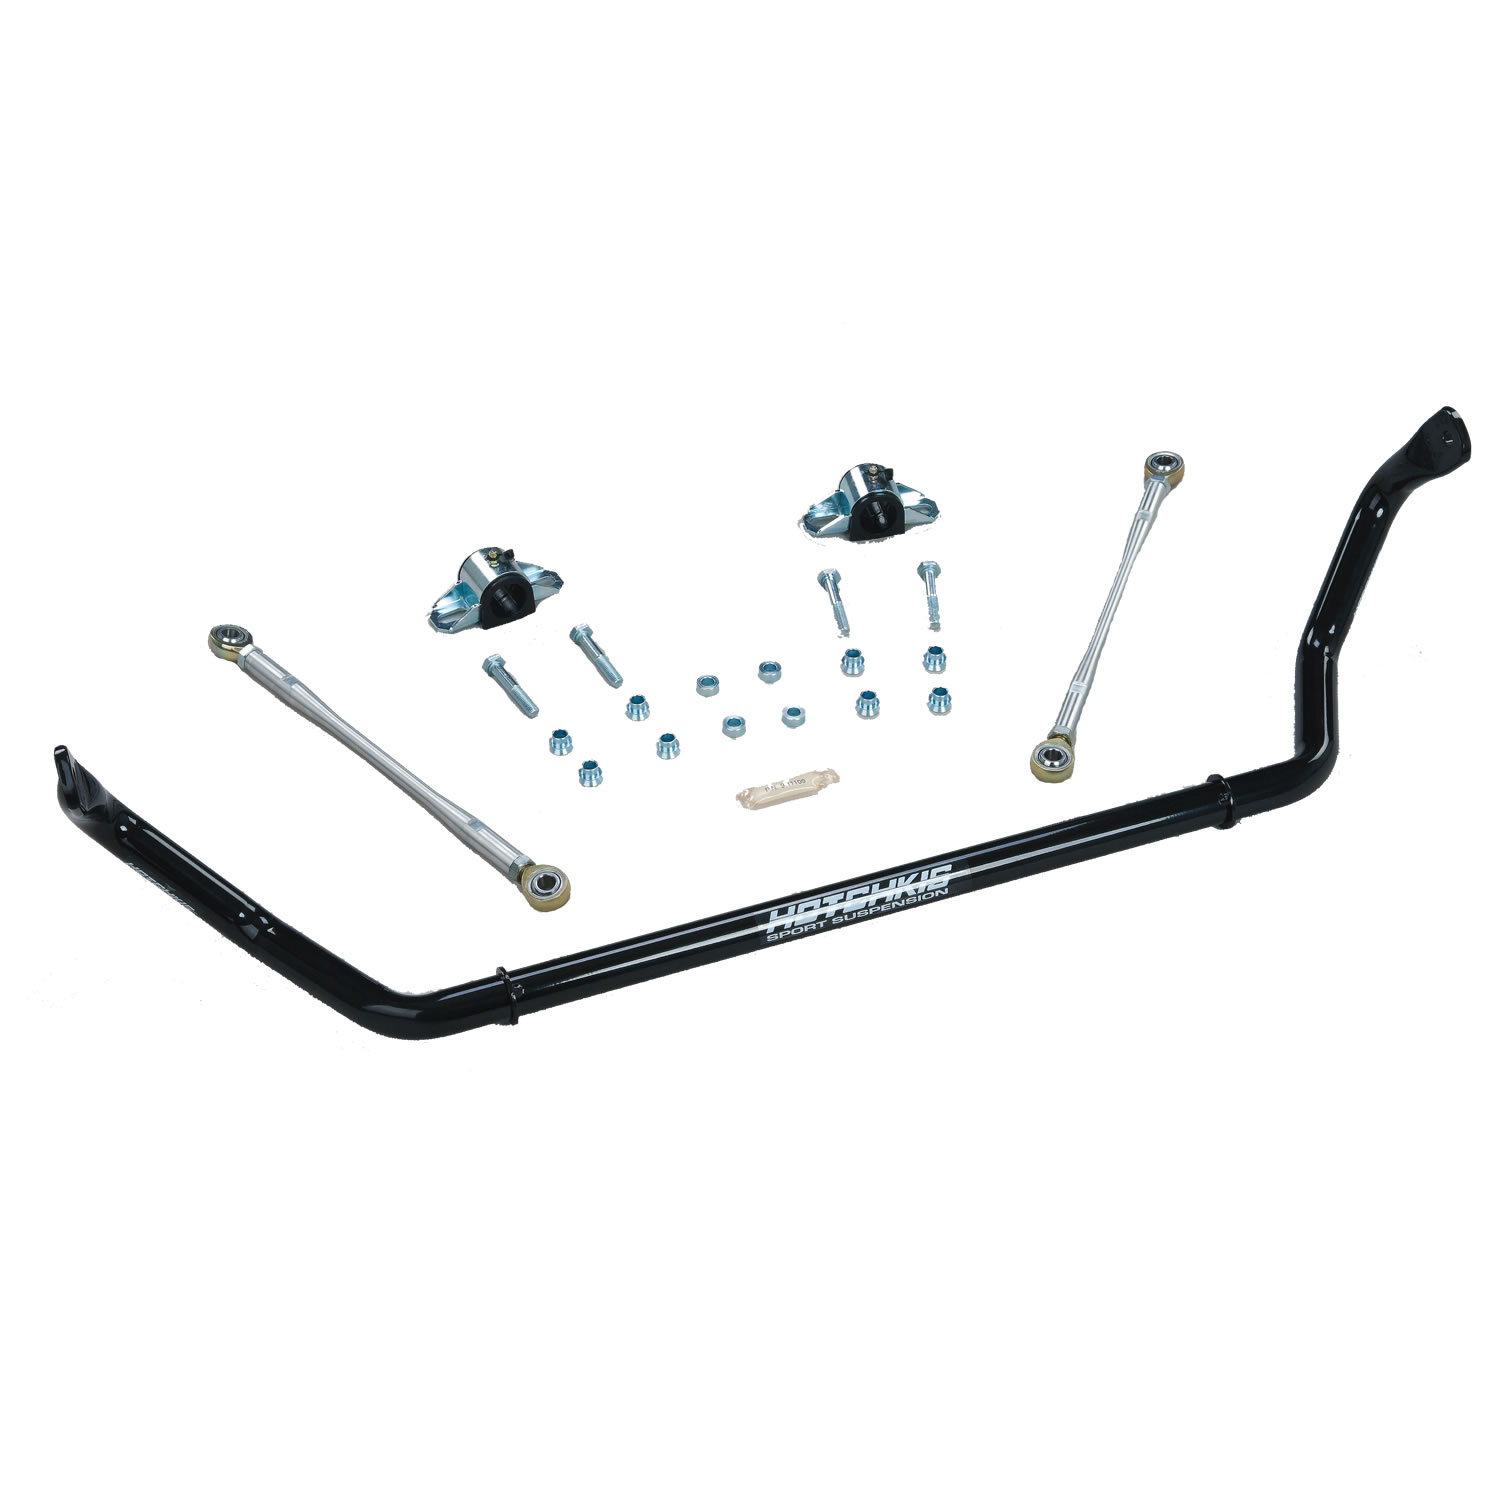 Camaro 2010+ Hotchkis Sport Adjustable Front Sway Bar Package - Competition